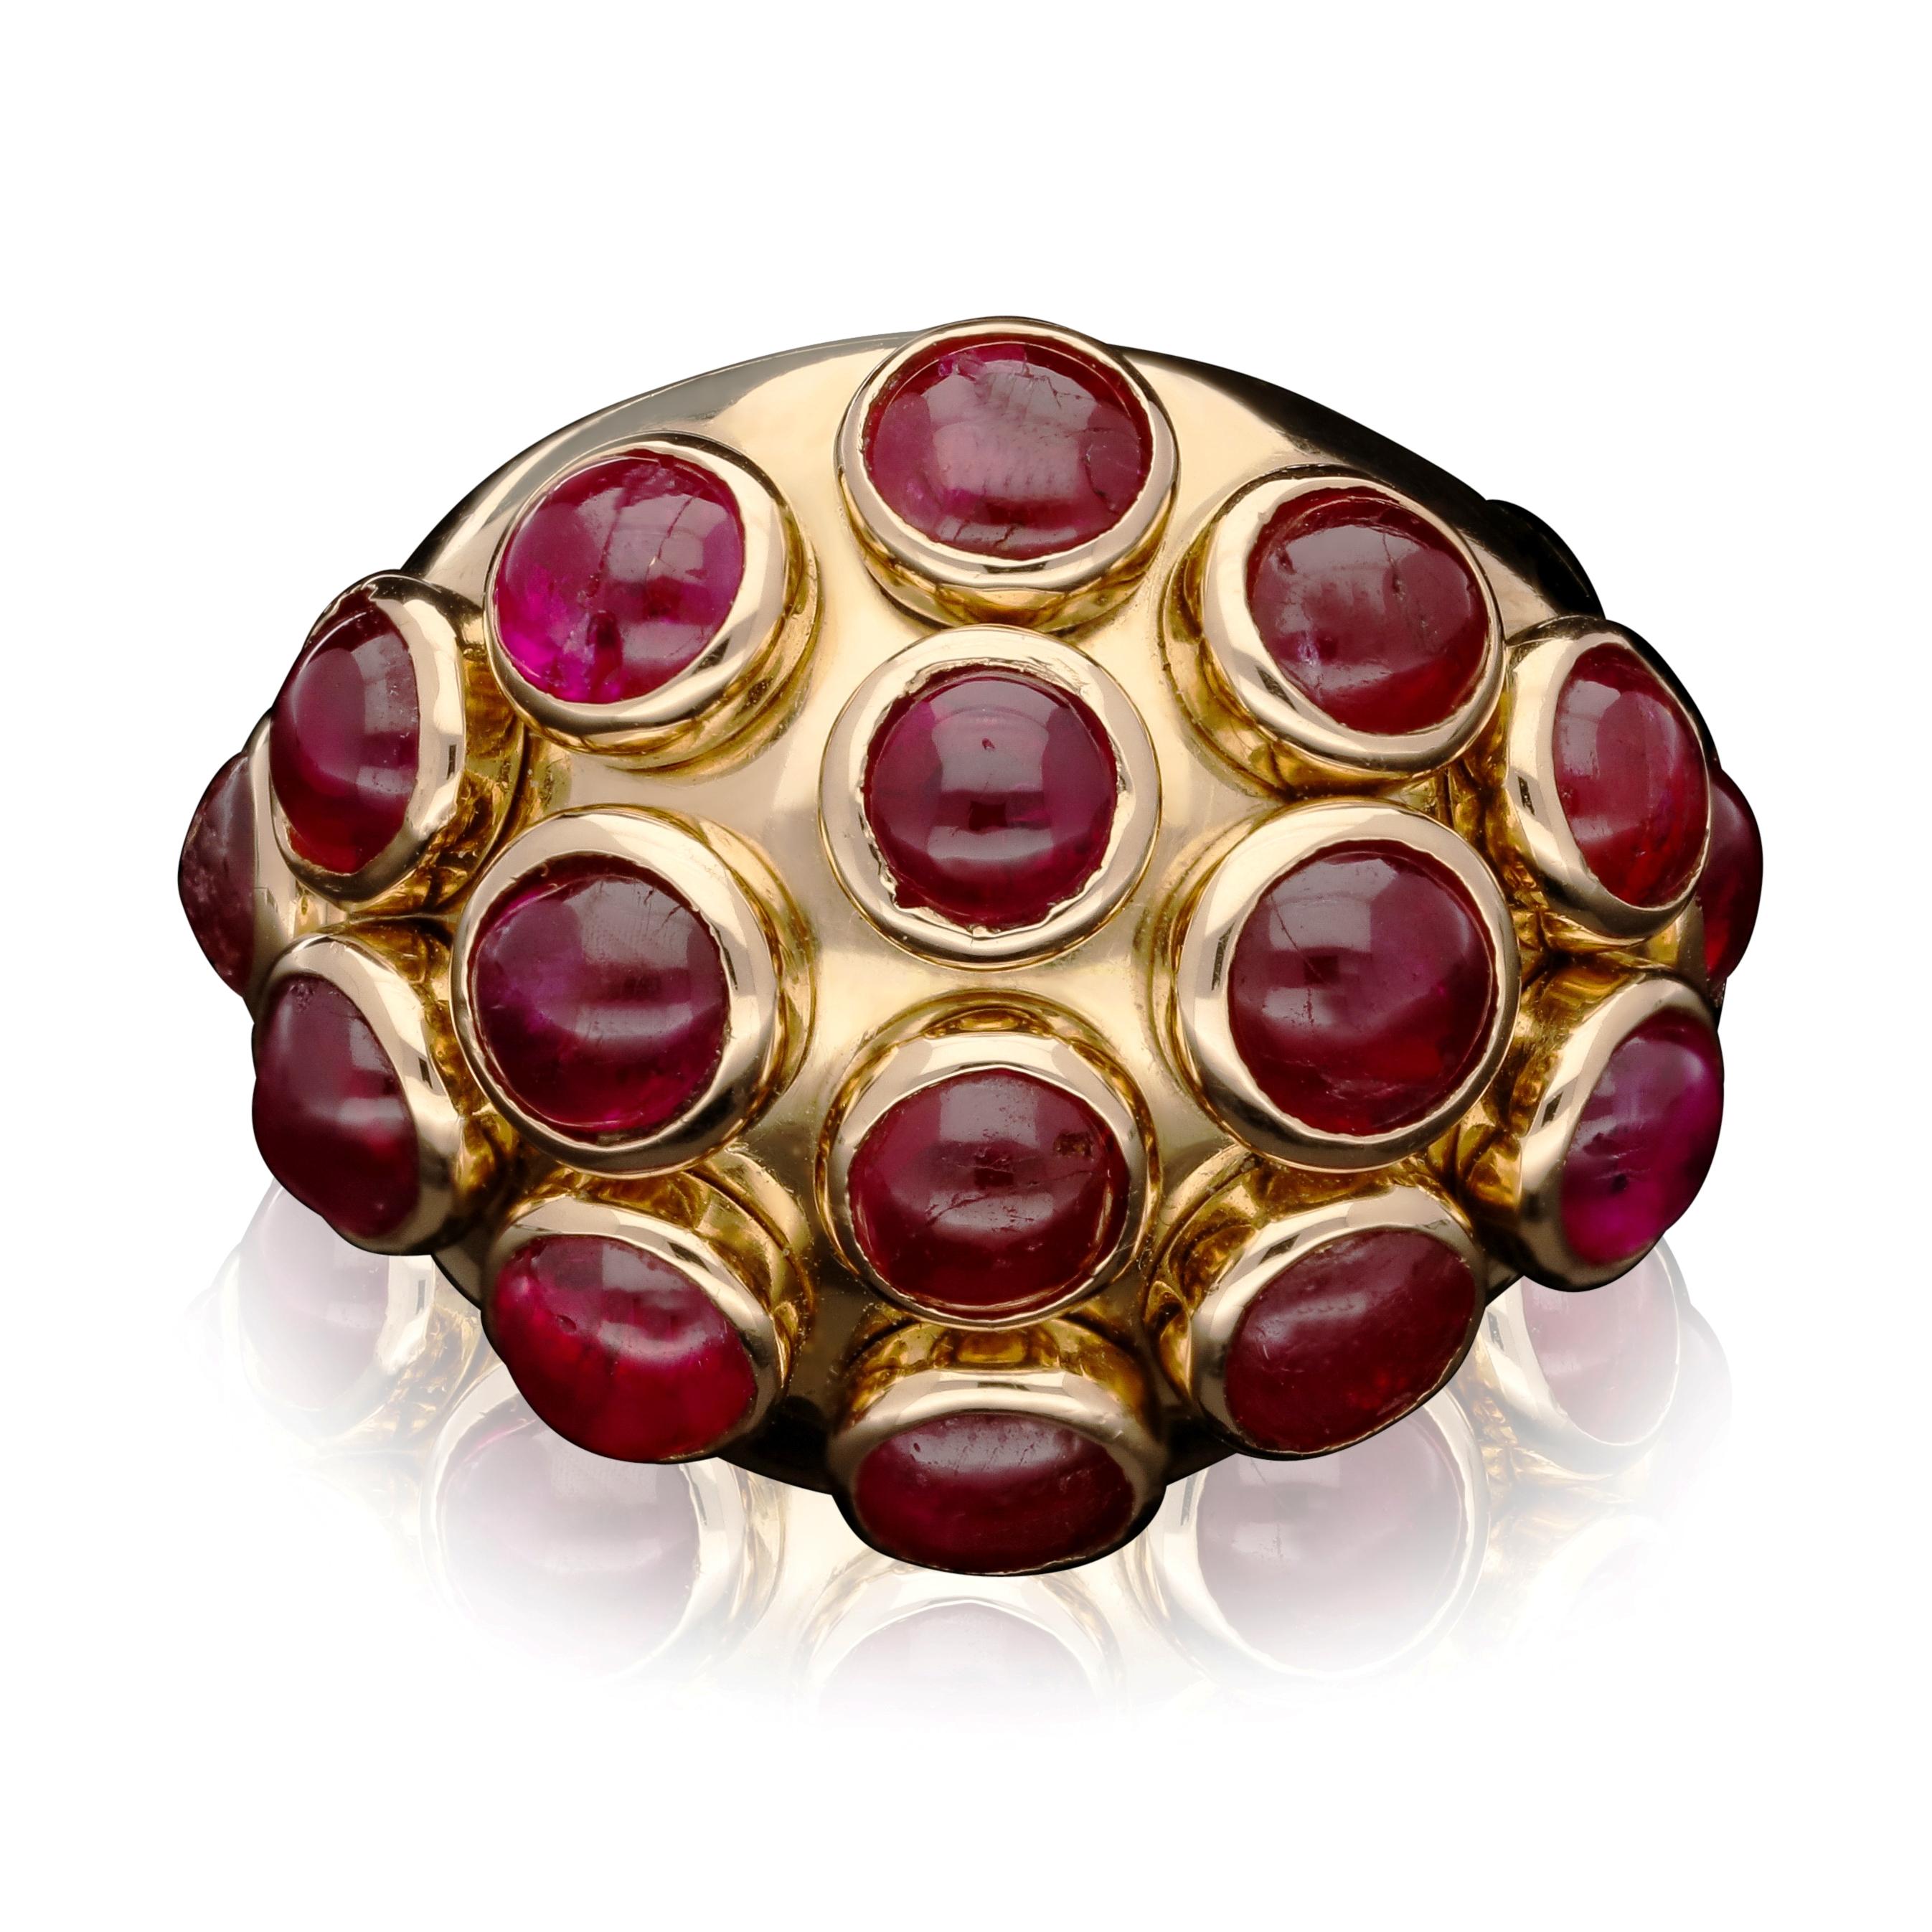 A fabulous Retro gold and ruby ring by Suzanne Belperron c.1940s, the bombe style ring in highly polished 18ct yellow gold with sixteen well matched ruby cabochons set in raised bezel settings across the front, in seven vertical rows tapering from